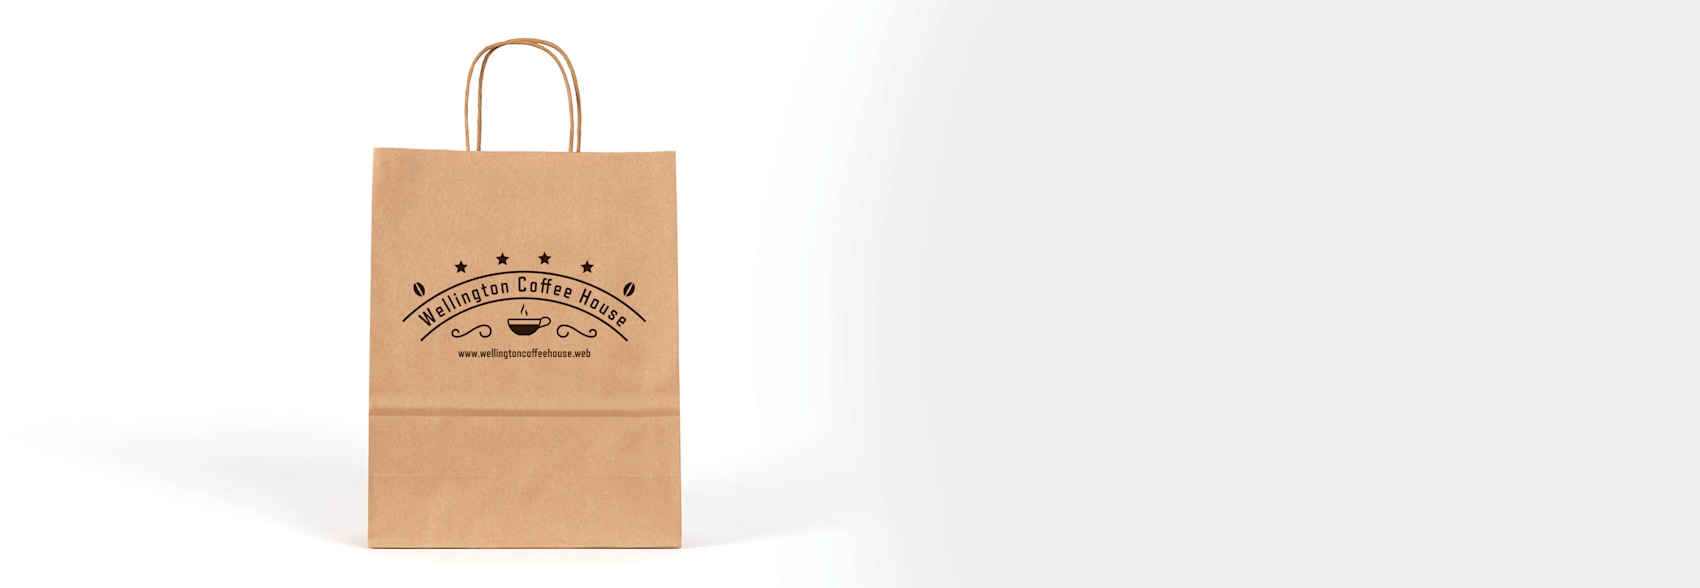 brown paper bag with business logo